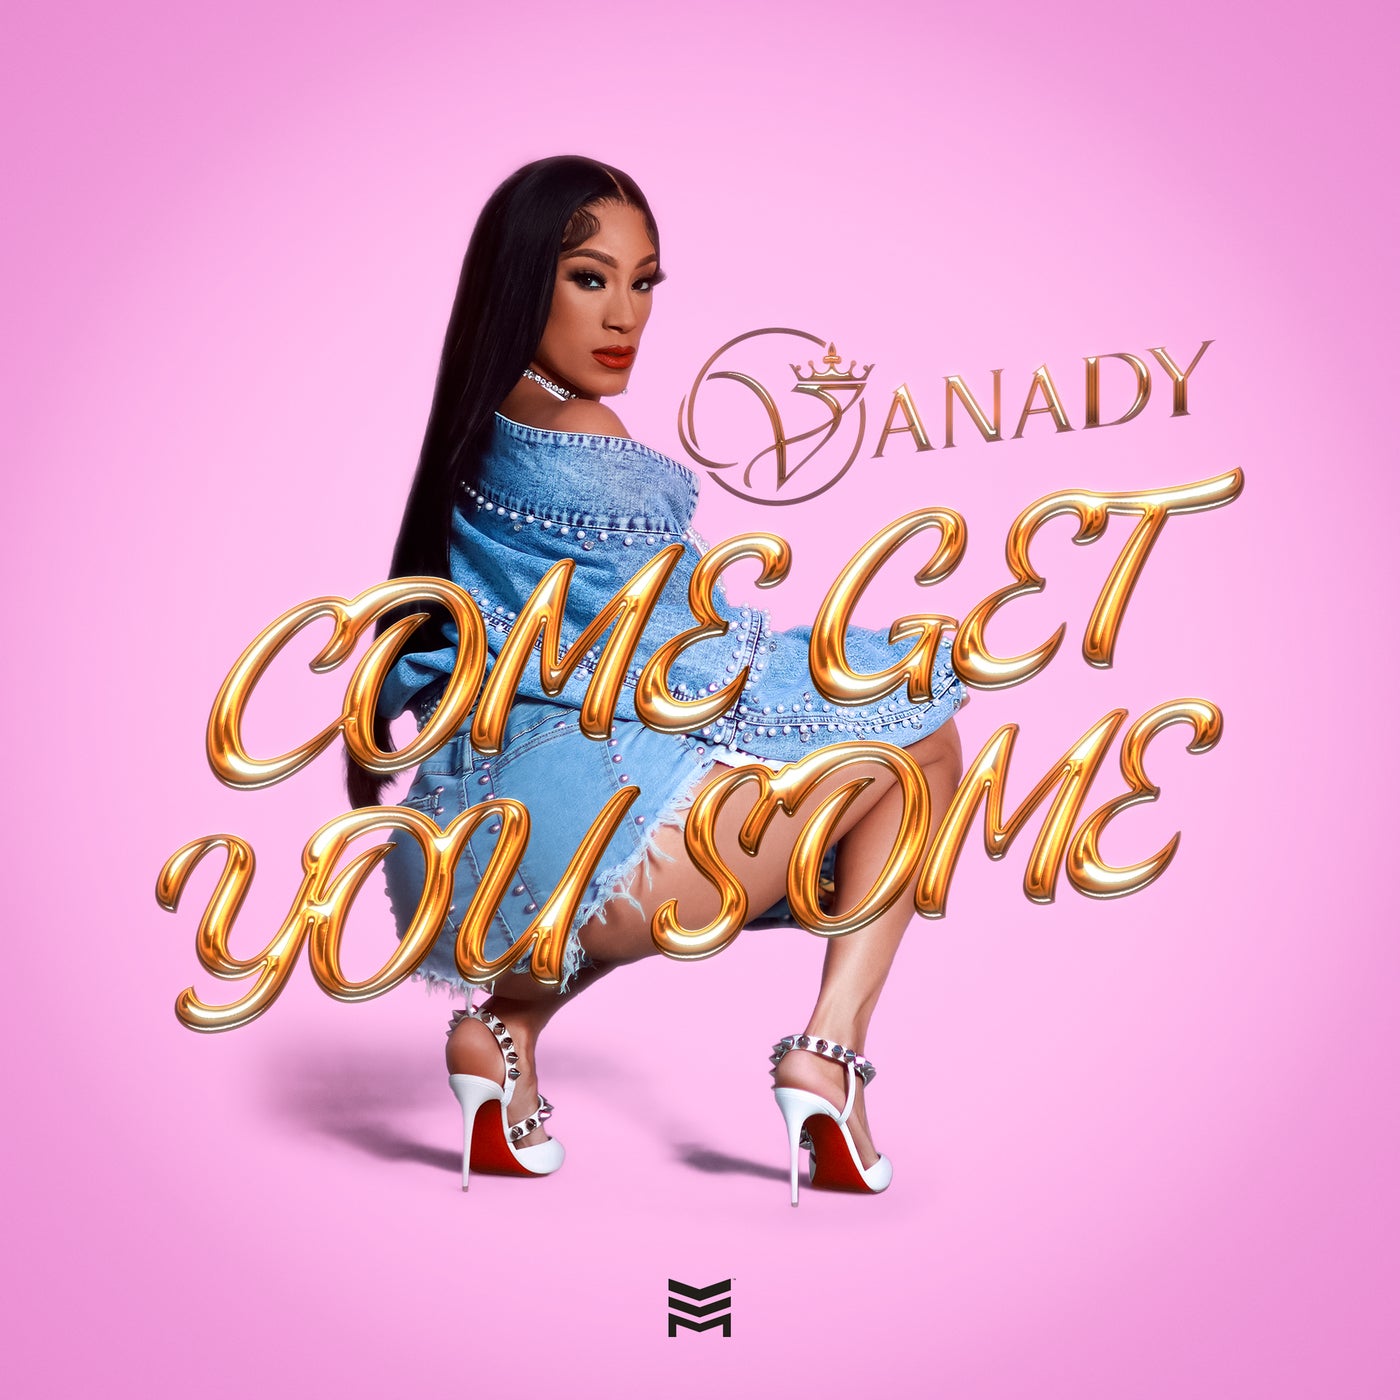 Come Get You Some by Vanady on Beatsource